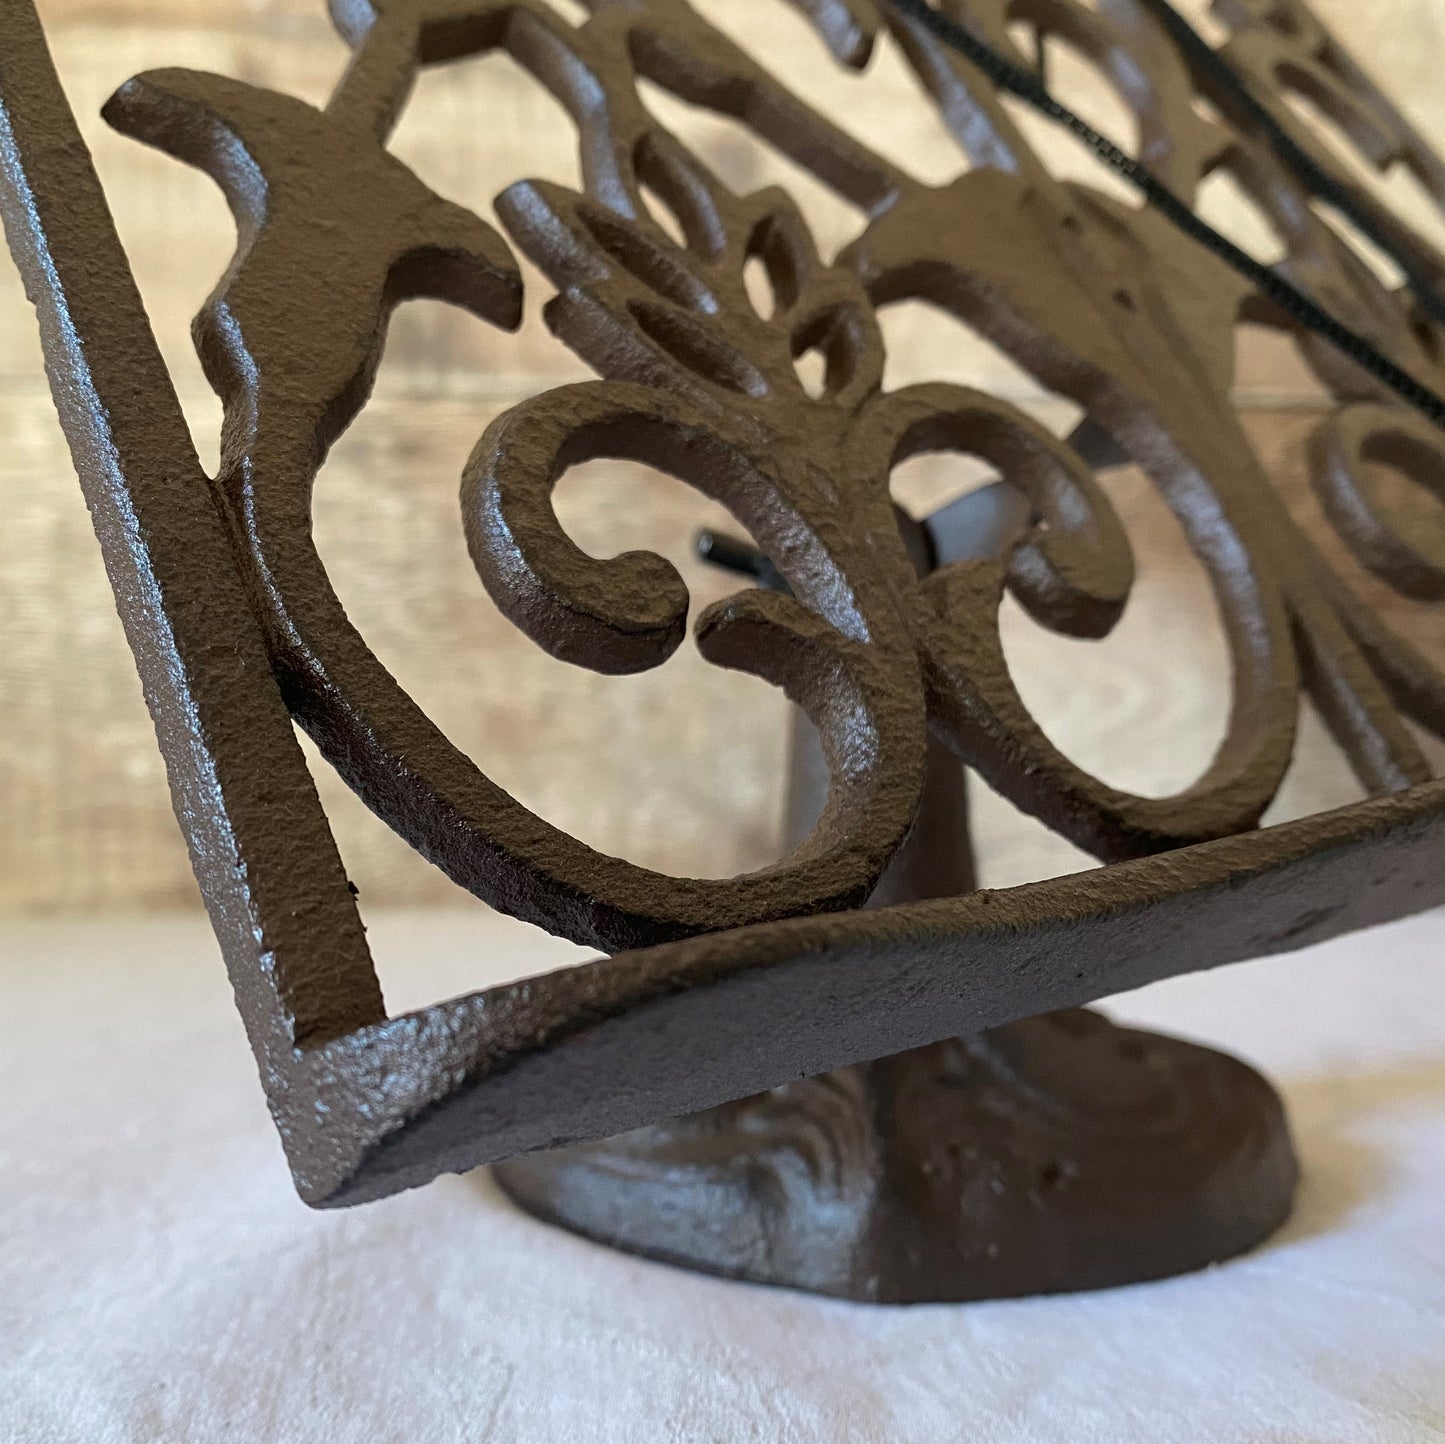 Traditional Cast Iron Ornate Cookbook Stand